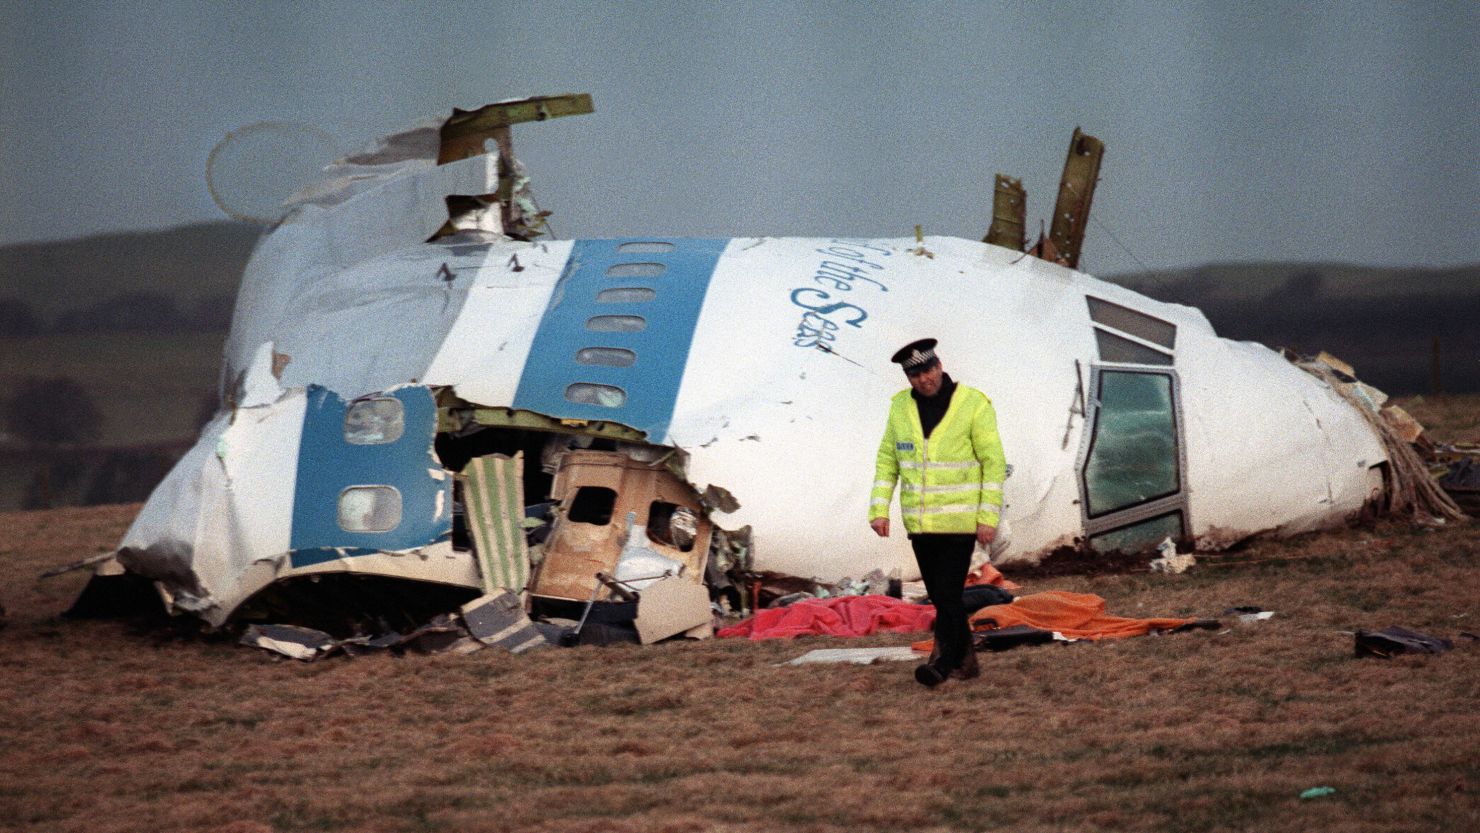 The Pan Am jet exploded over the Scottish town of Lockerbie killing all 259 people on board in 1988